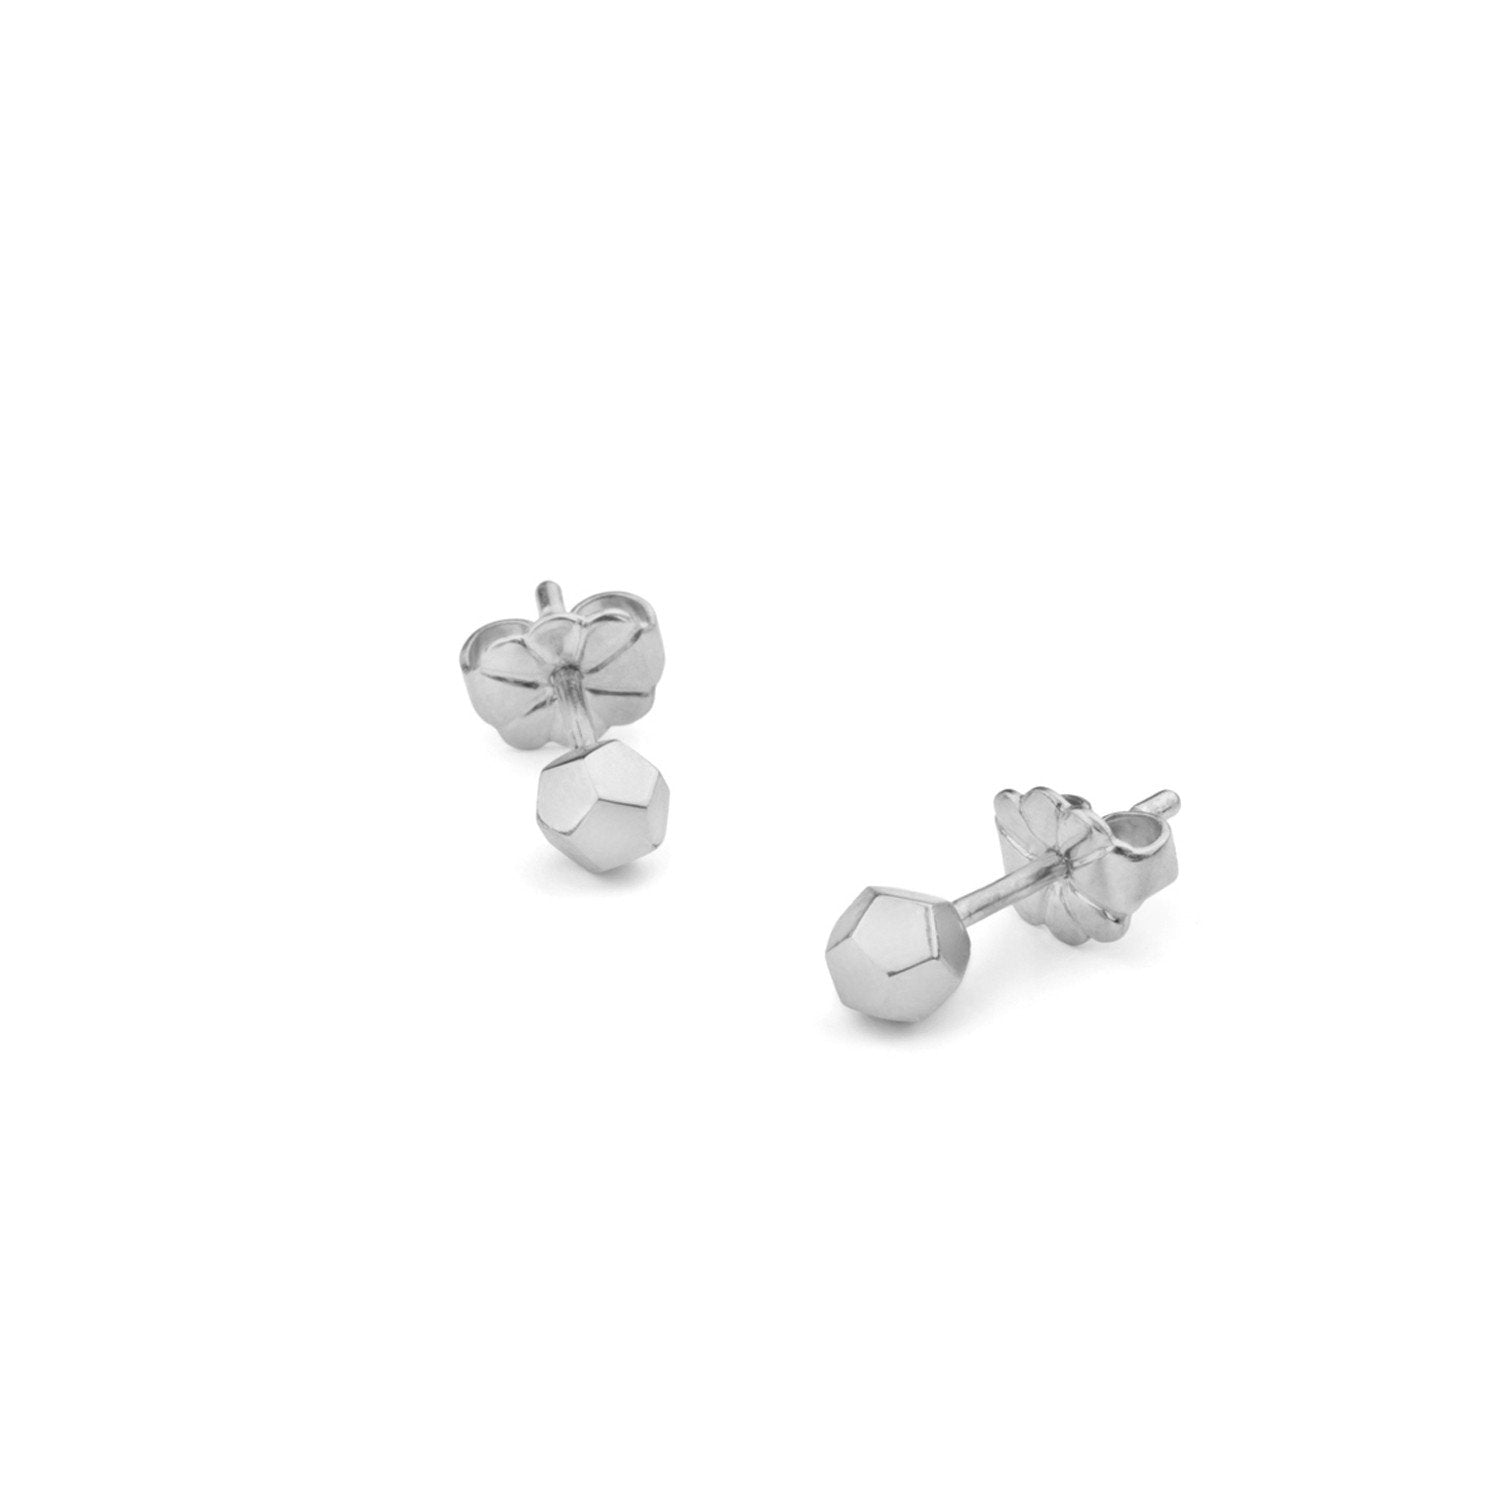 Dodecahedron Stud Earrings - Silver - Myia Bonner Jewellery